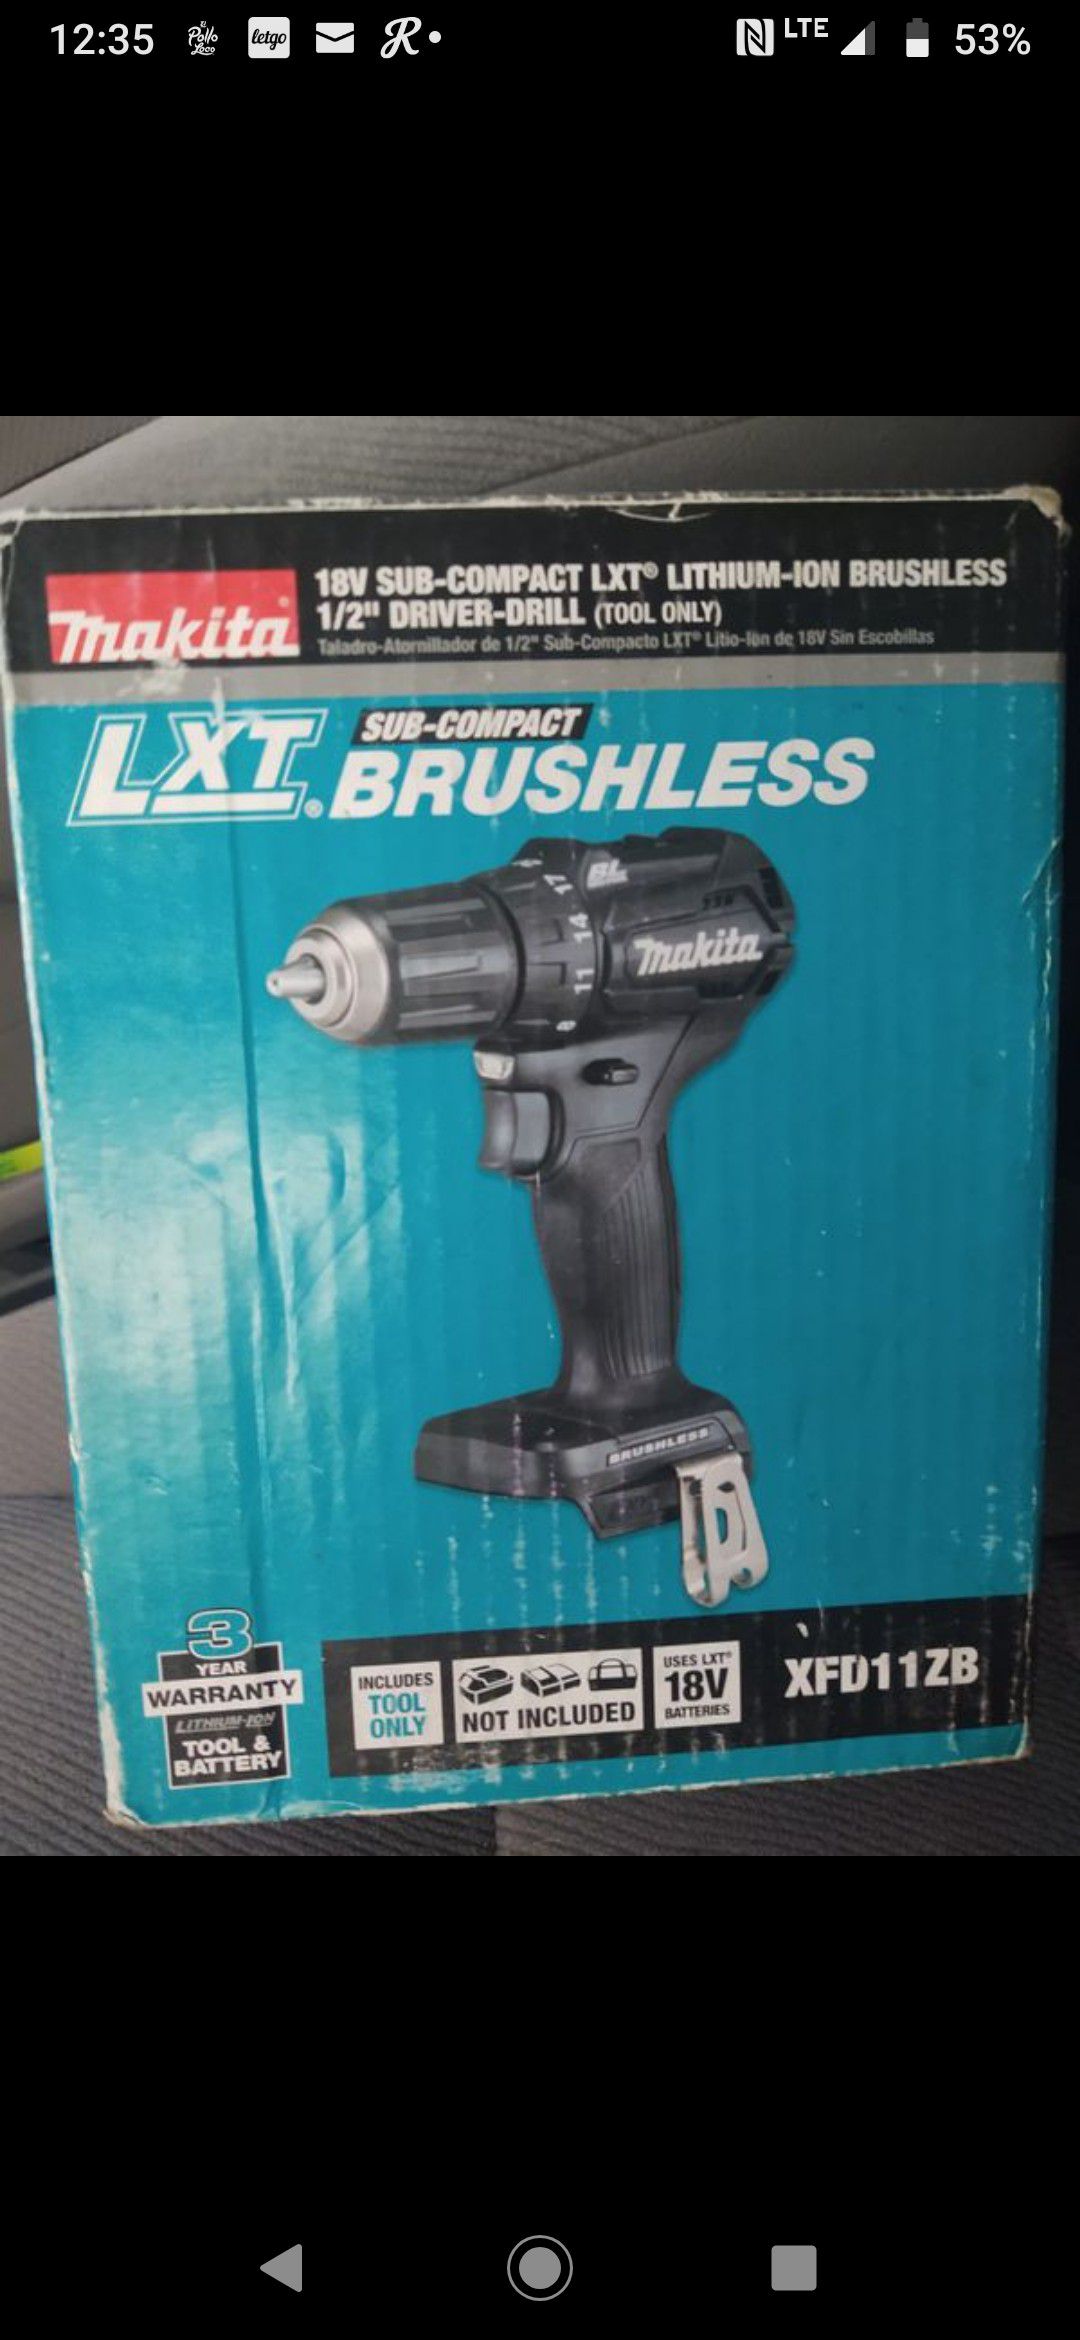 Makita compact drill brushless new (( no charger no battery)) firm$$ or you'll be blocked